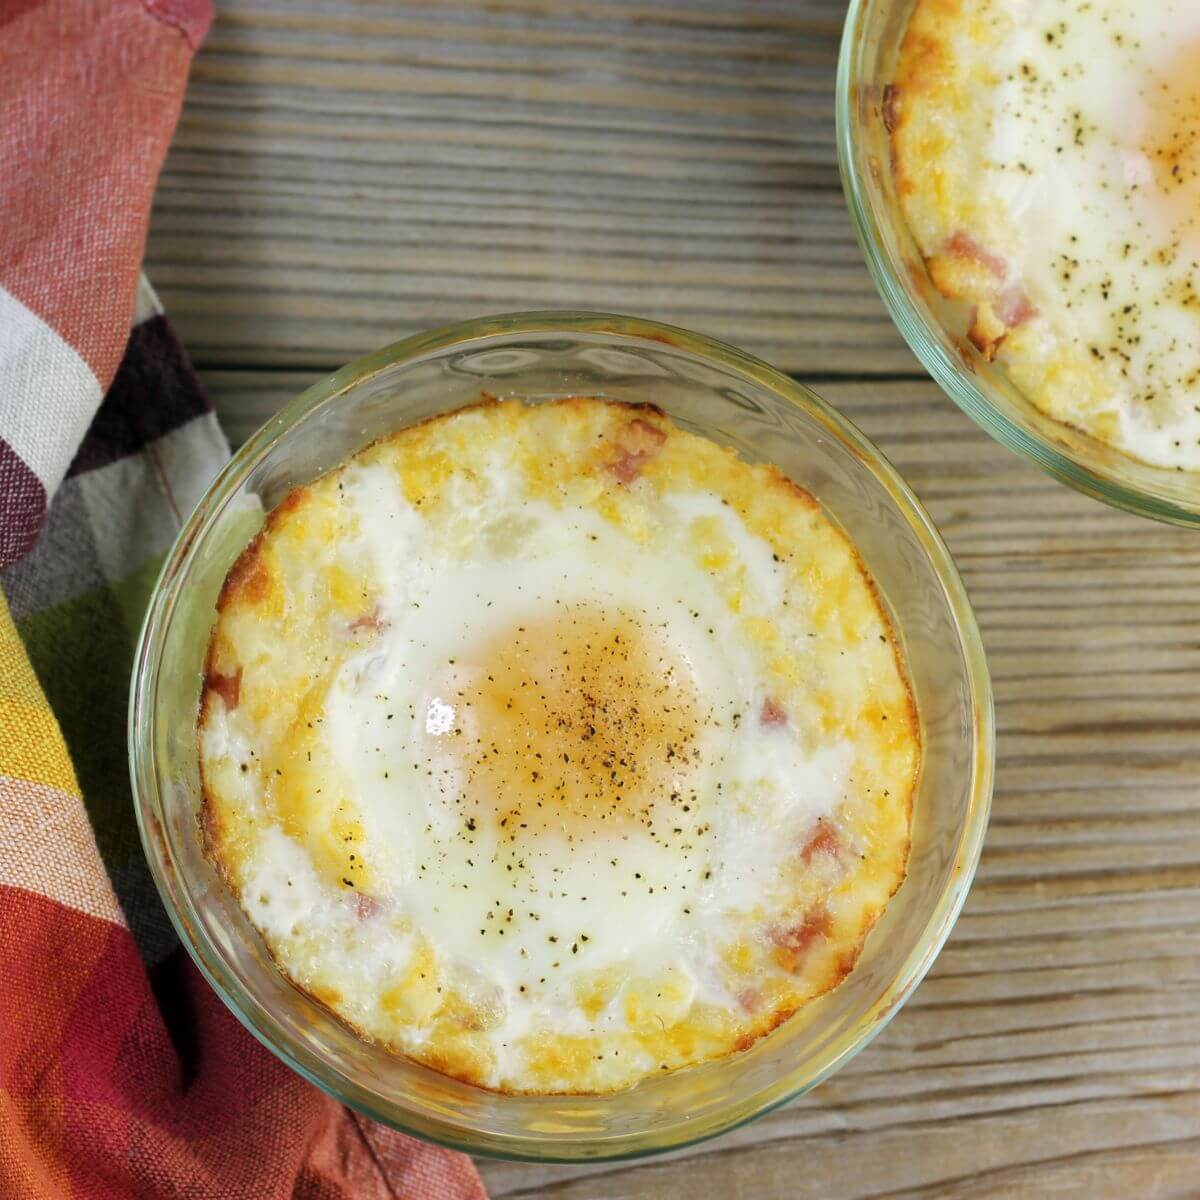 Looking down a custard cups filled with baked mashed potatoes and an egg on top.